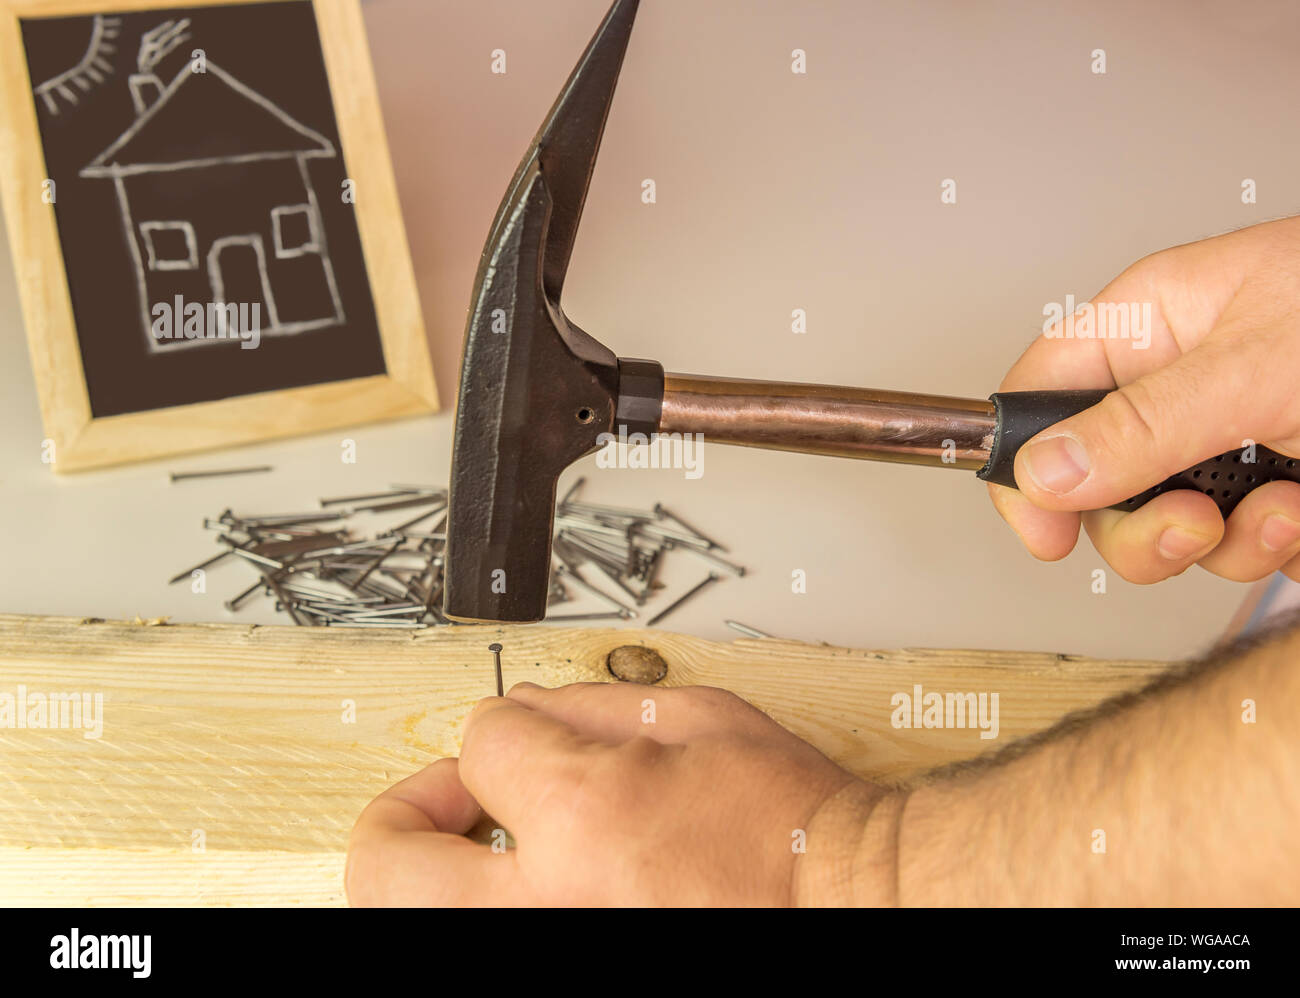 Cropped Image Of Carpenter Hammering Nail On Wood Stock Photo